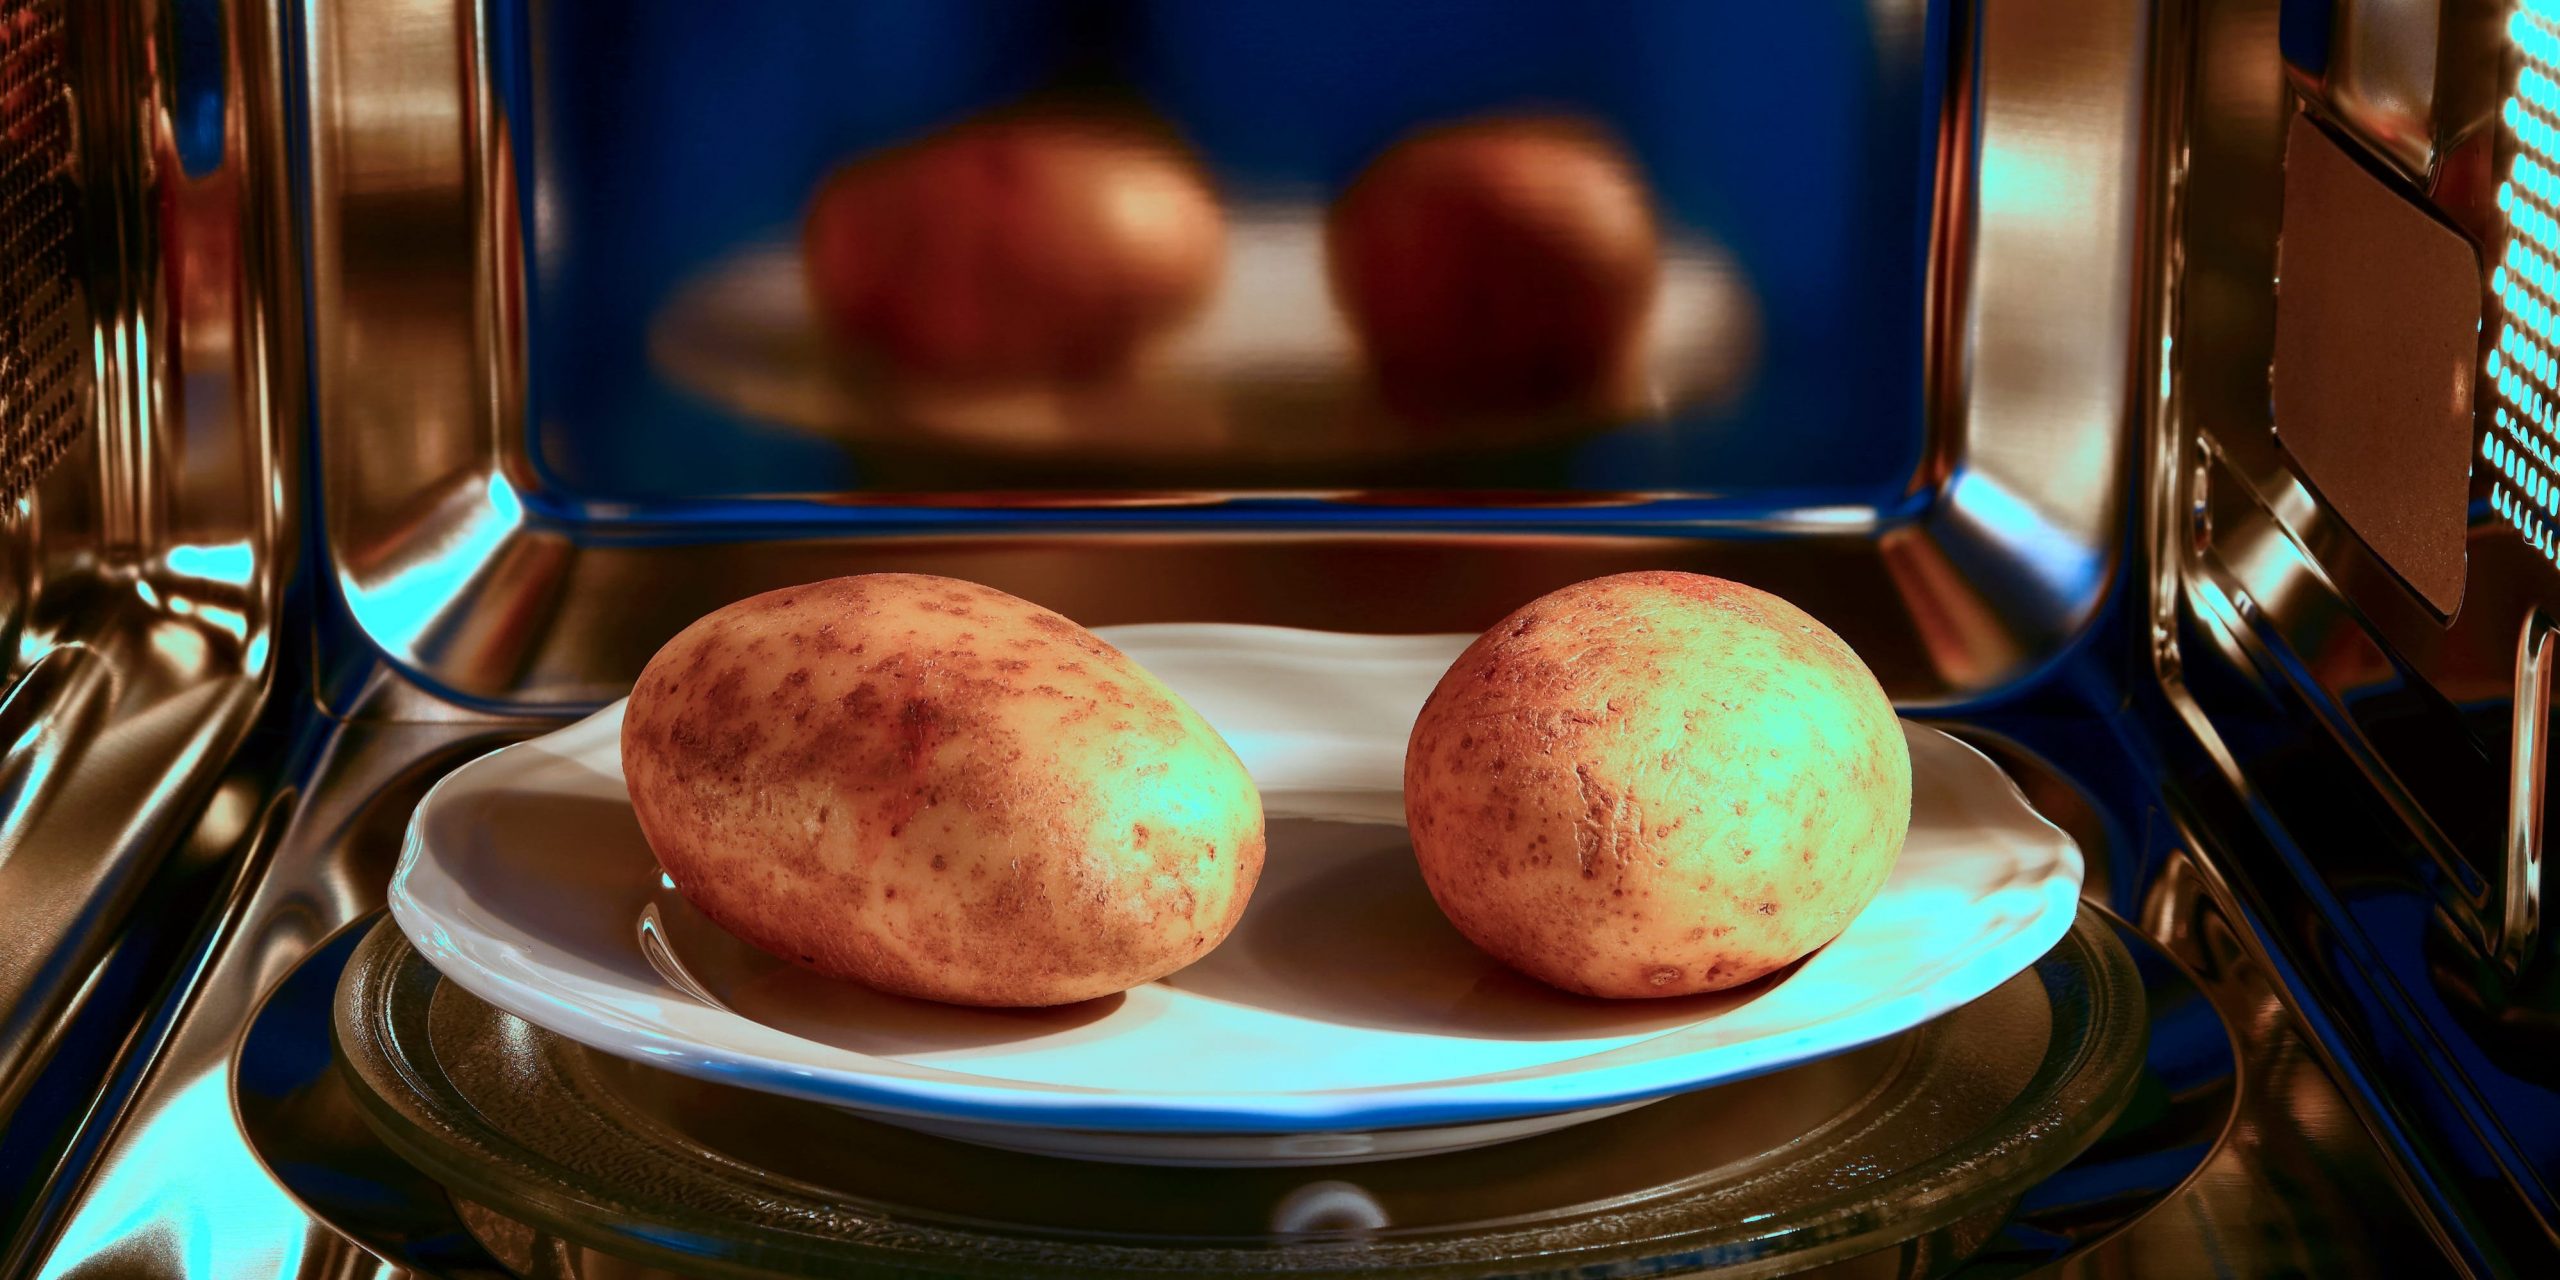 Two potatoes sitting on a white plate inside a microwave